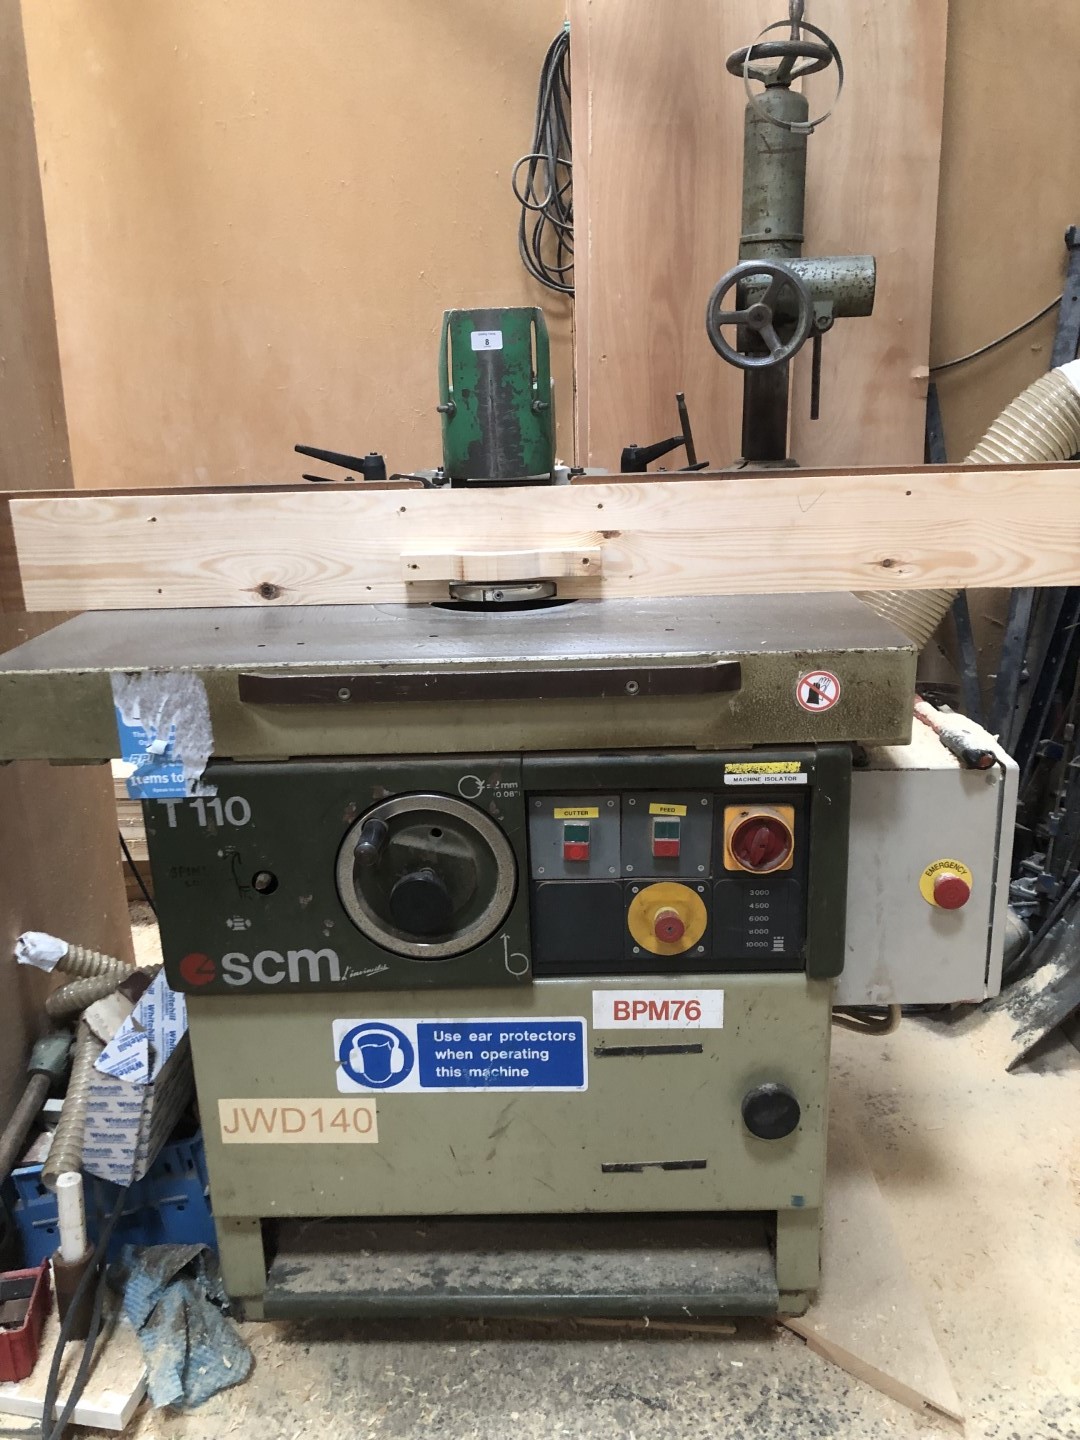 An SCM T110 spindle moulder, JWD140, with auto-feed.